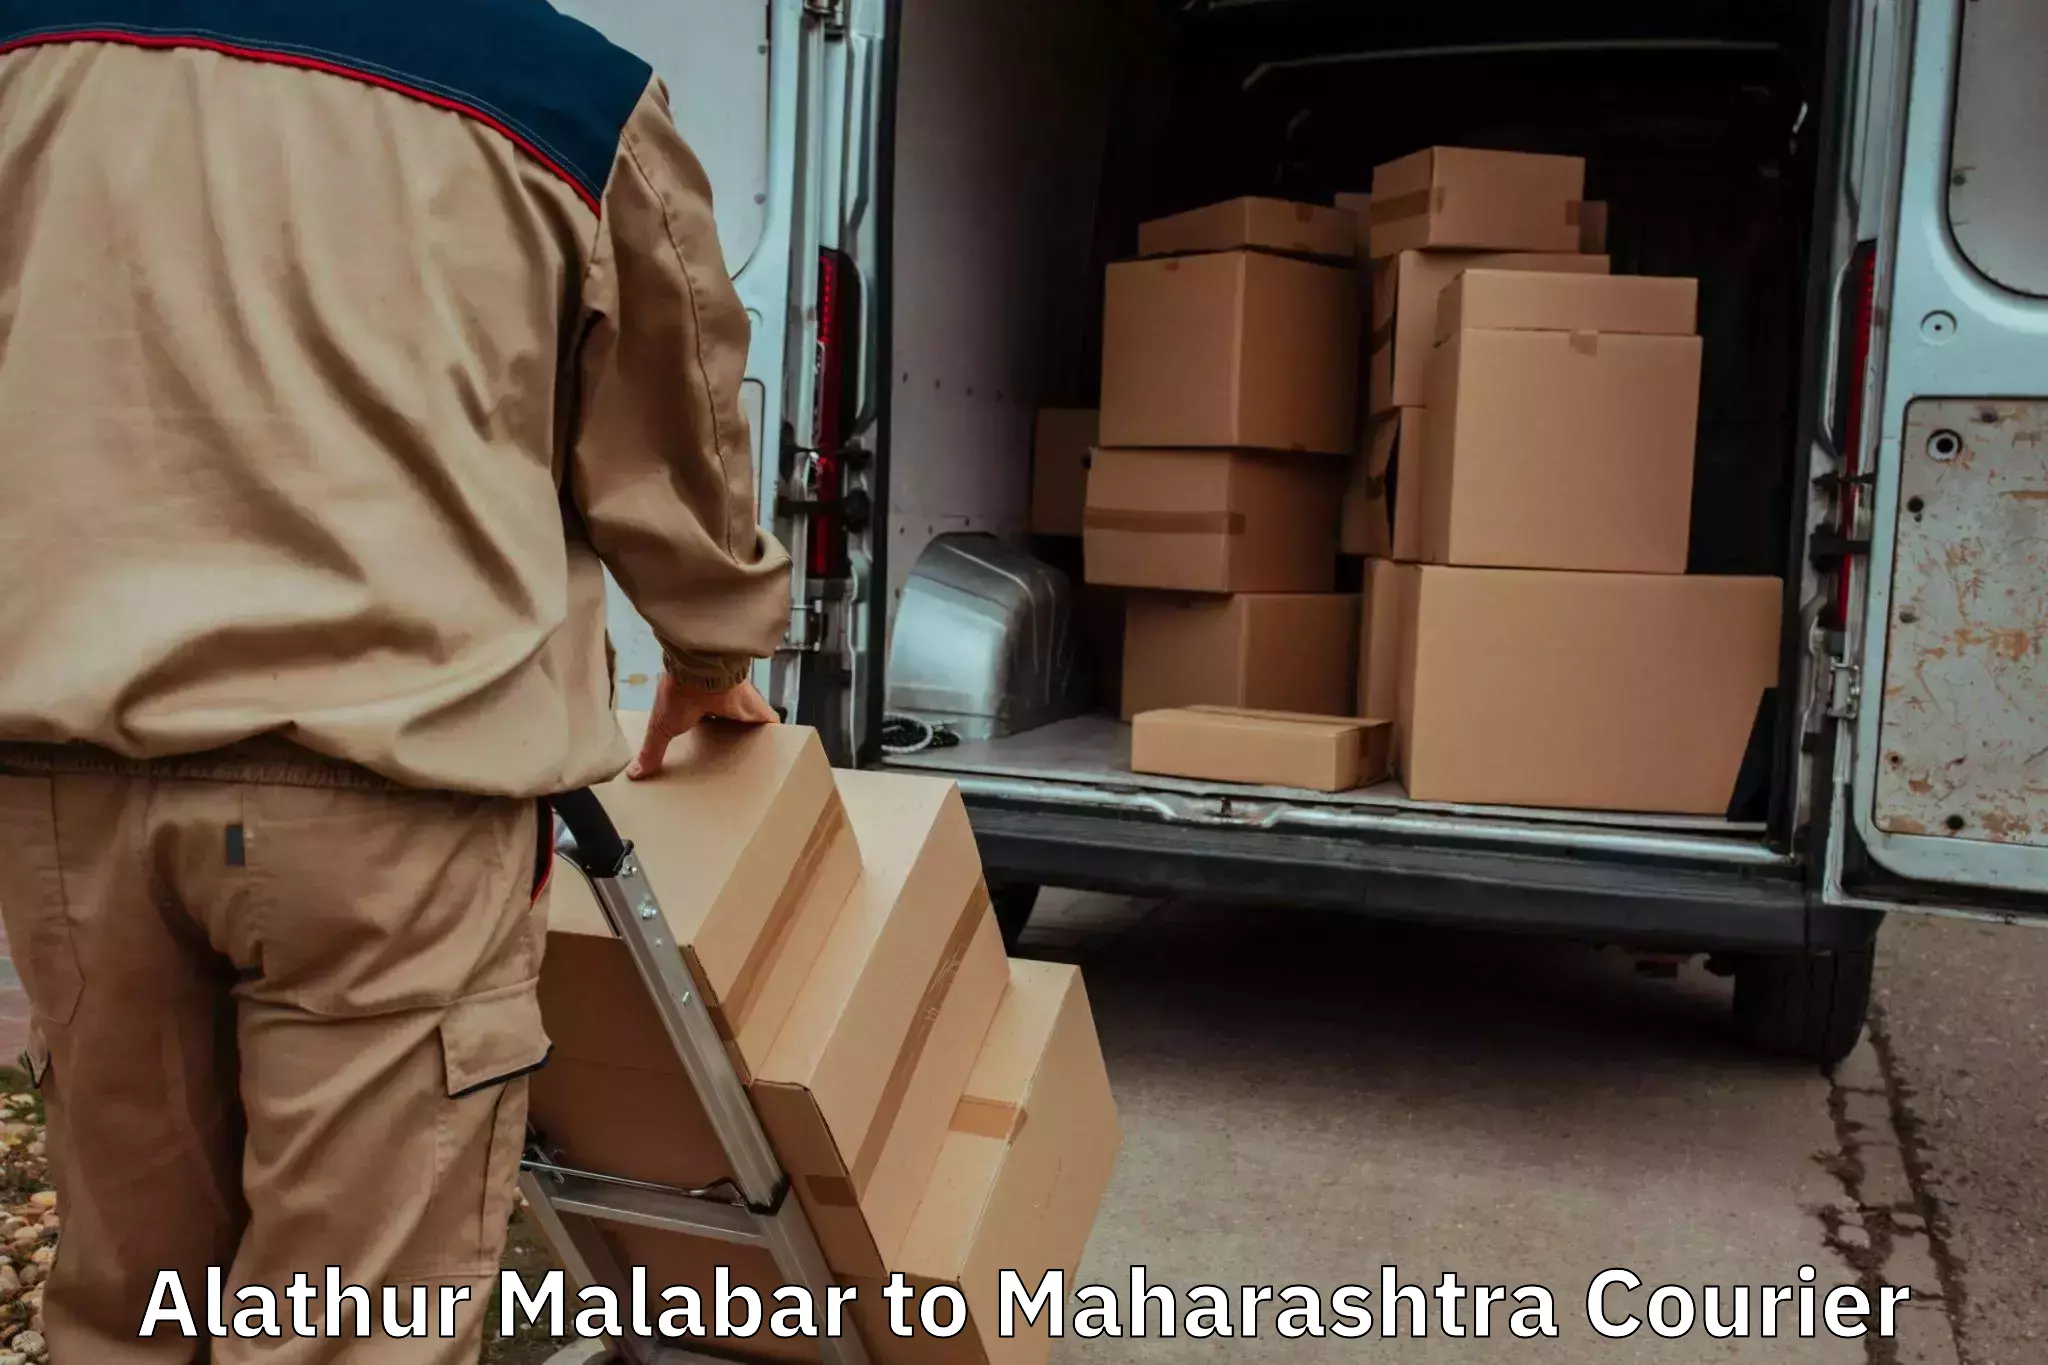 Residential furniture movers Alathur Malabar to Sillod